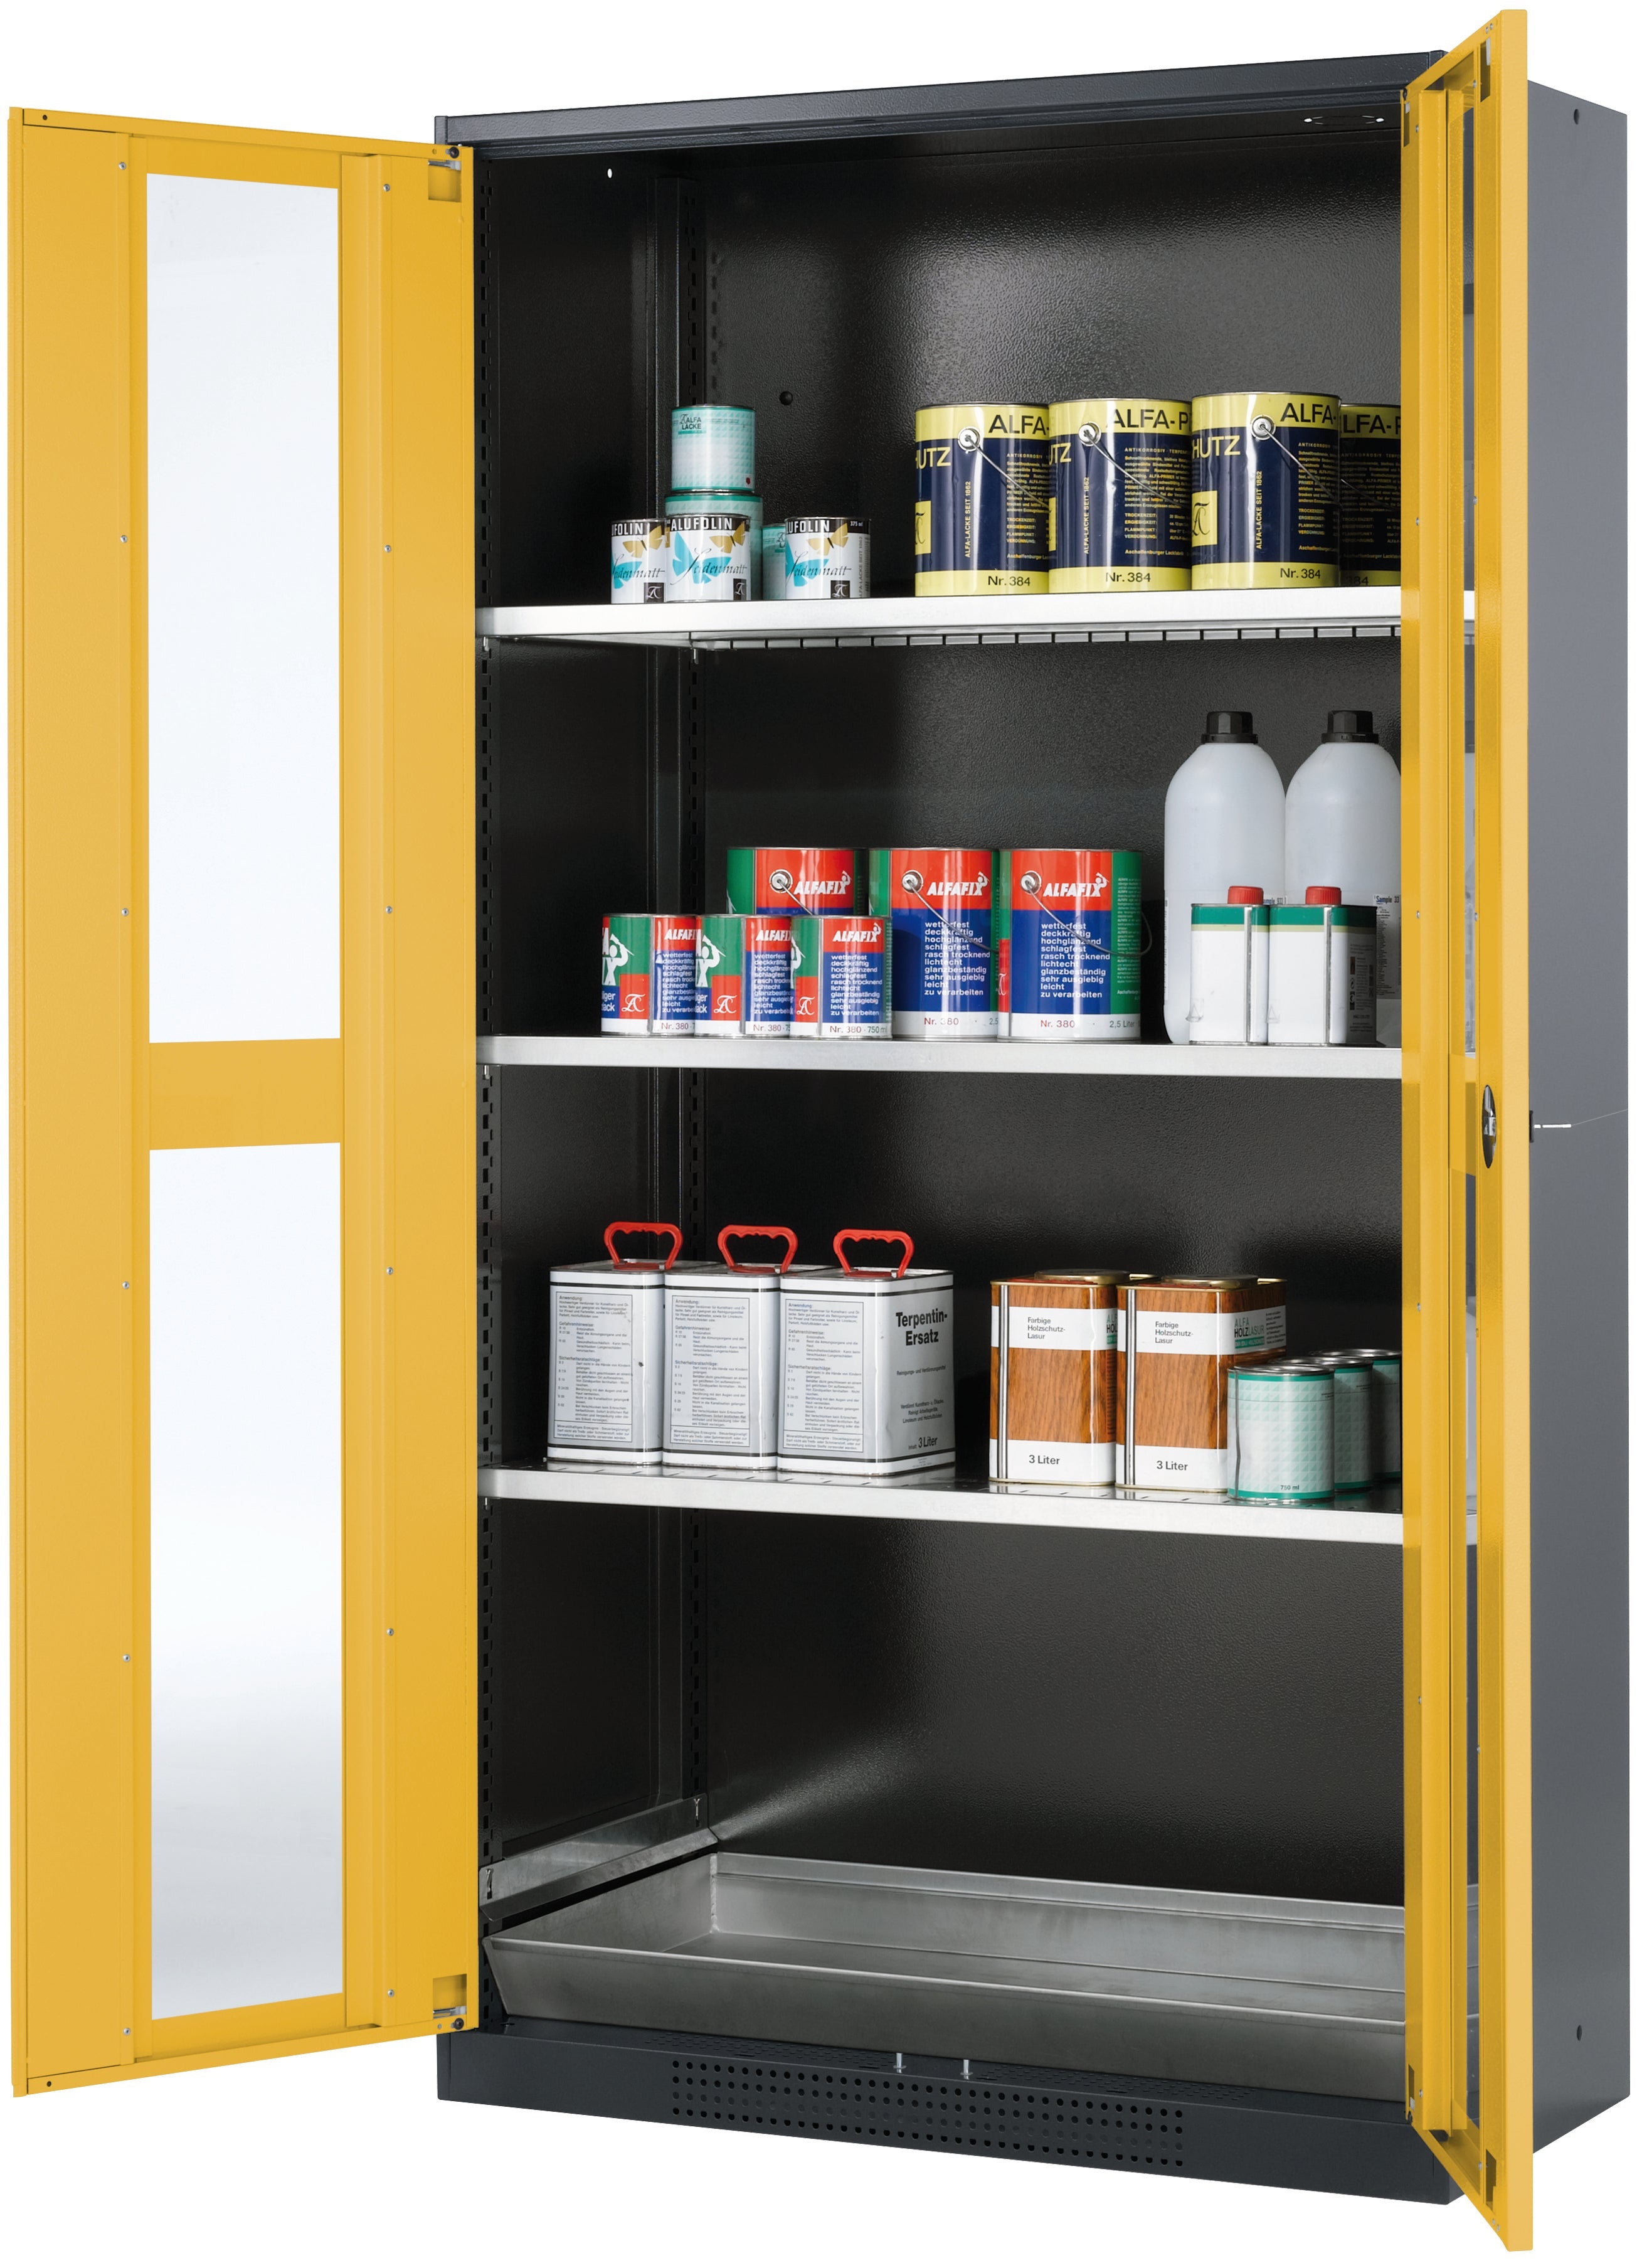 Chemical cabinet CS-CLASSIC-G model CS.195.105.WDFW in safety yellow RAL 1004 with 3x standard shelves (sheet steel)